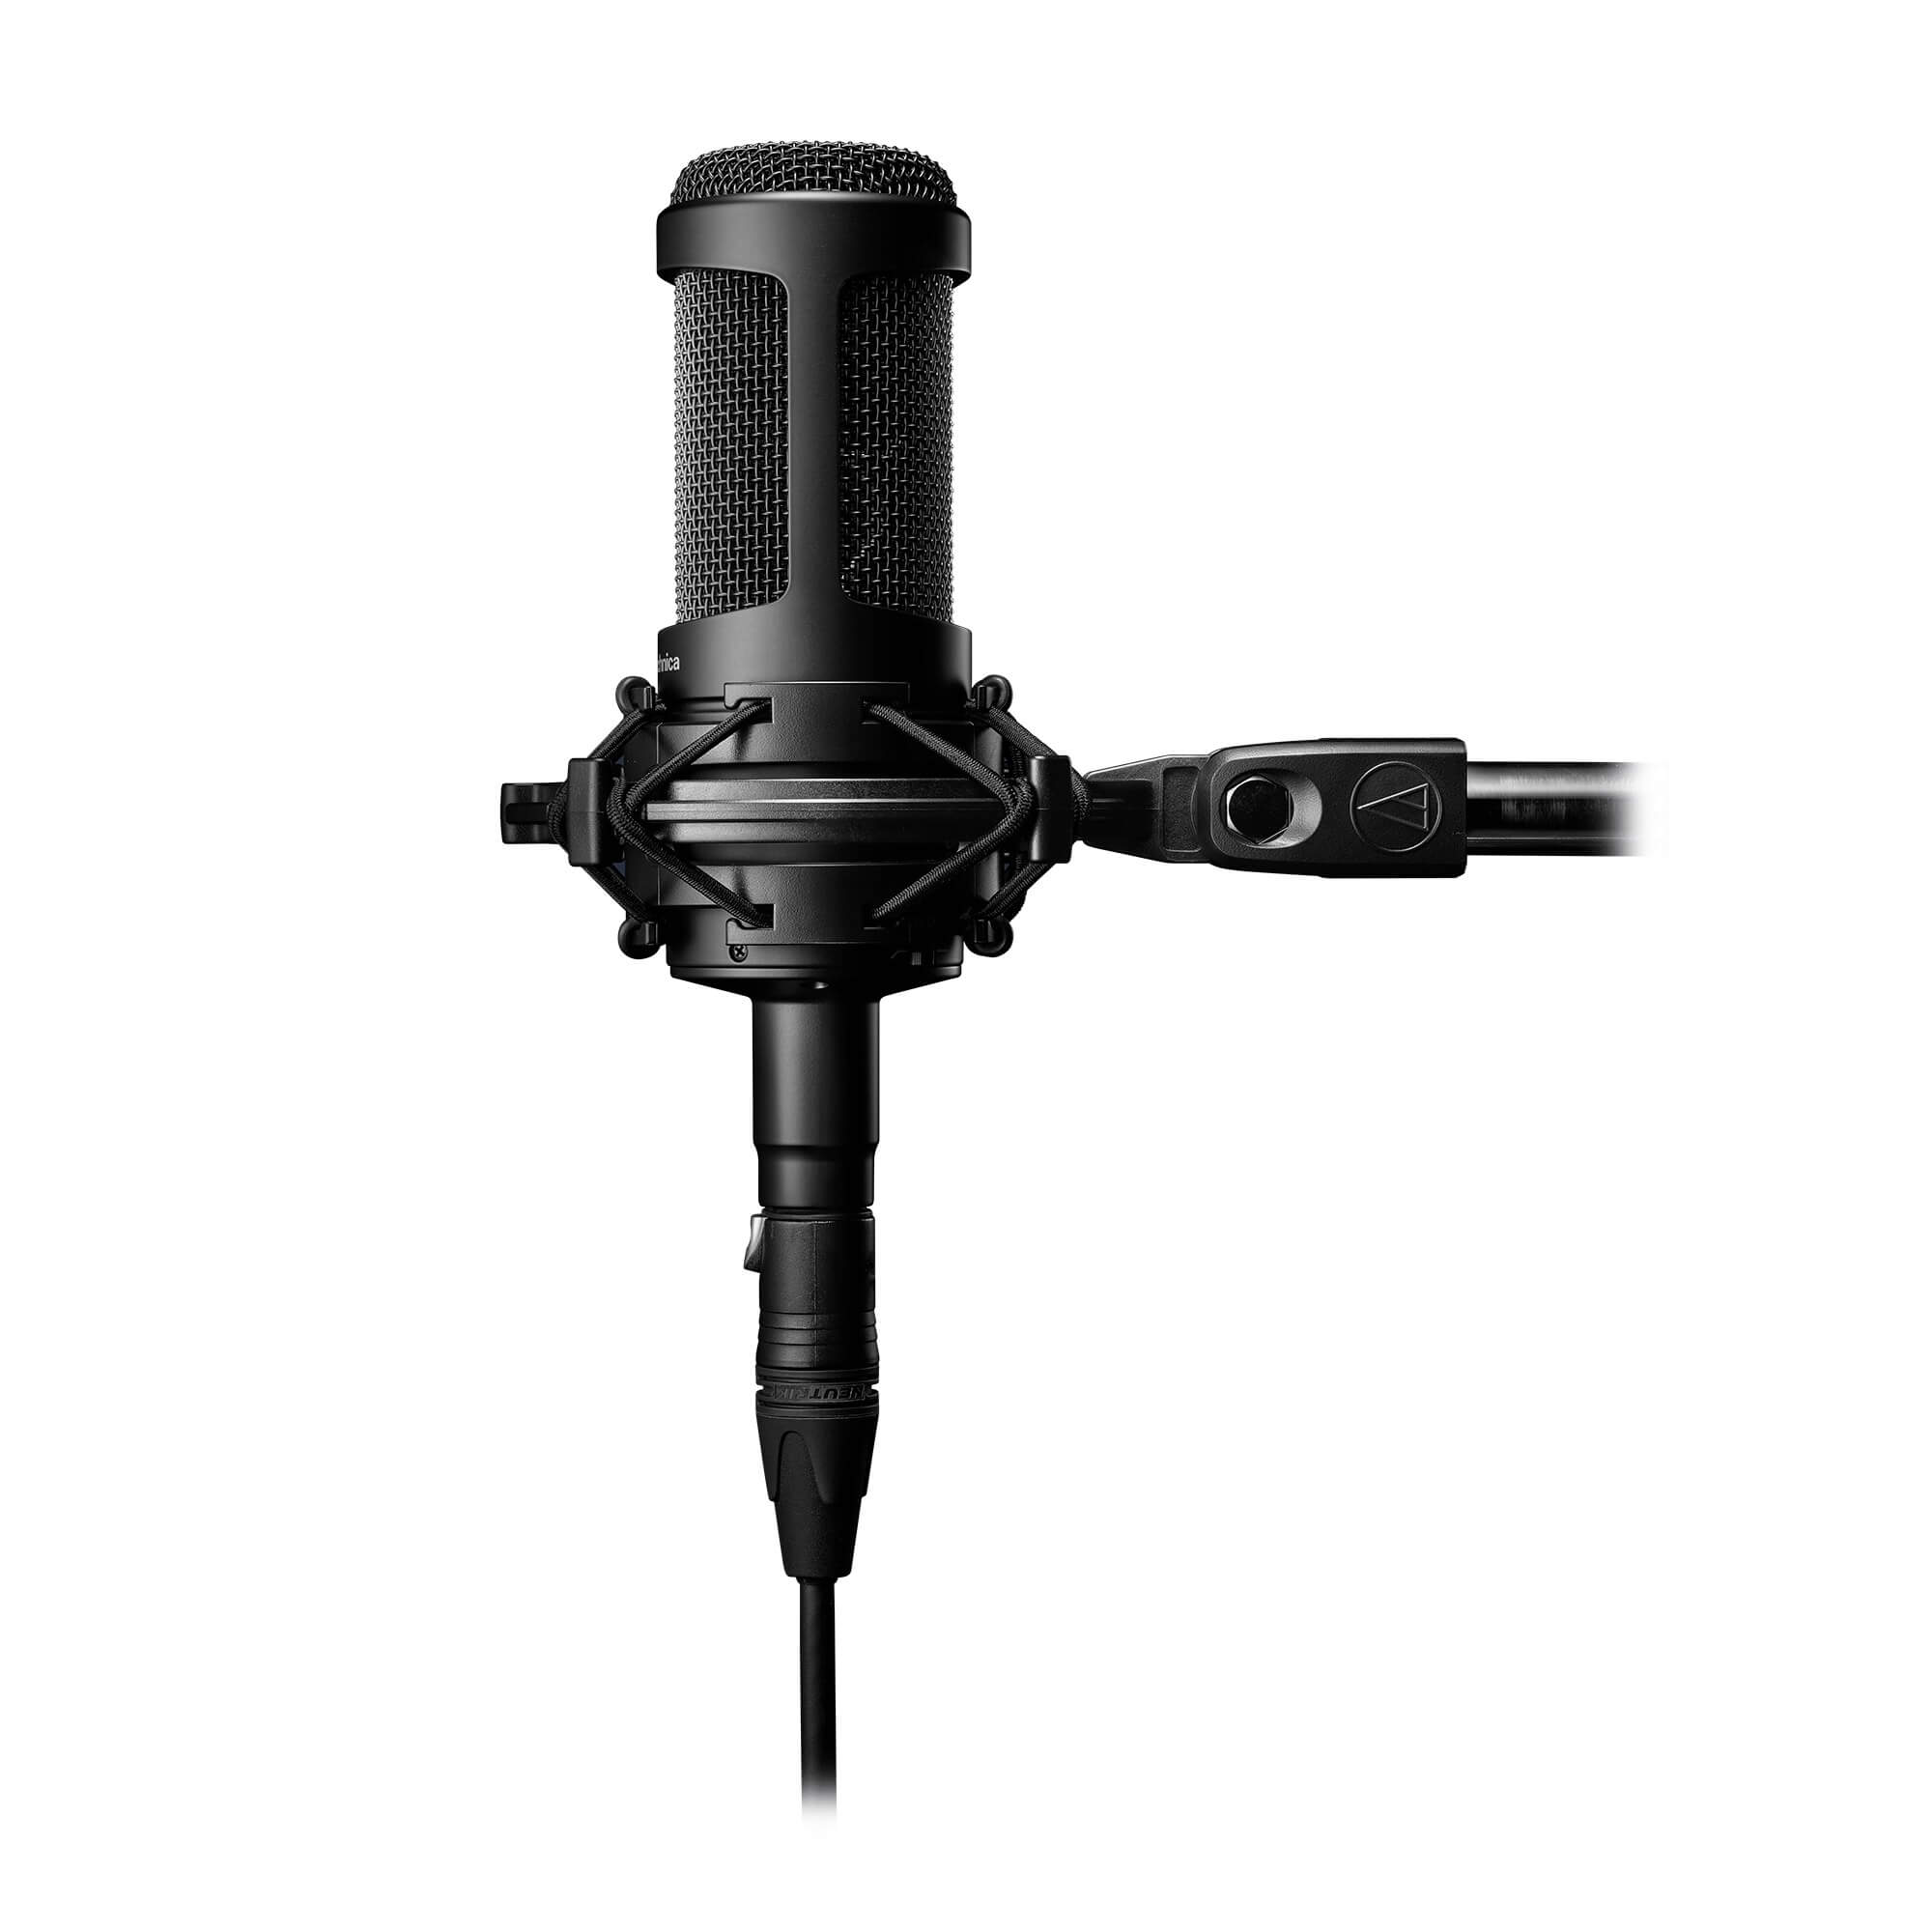 Audio-Technica AT2035 - Cardioid Condenser Side-Address Microphone, with included shock mount